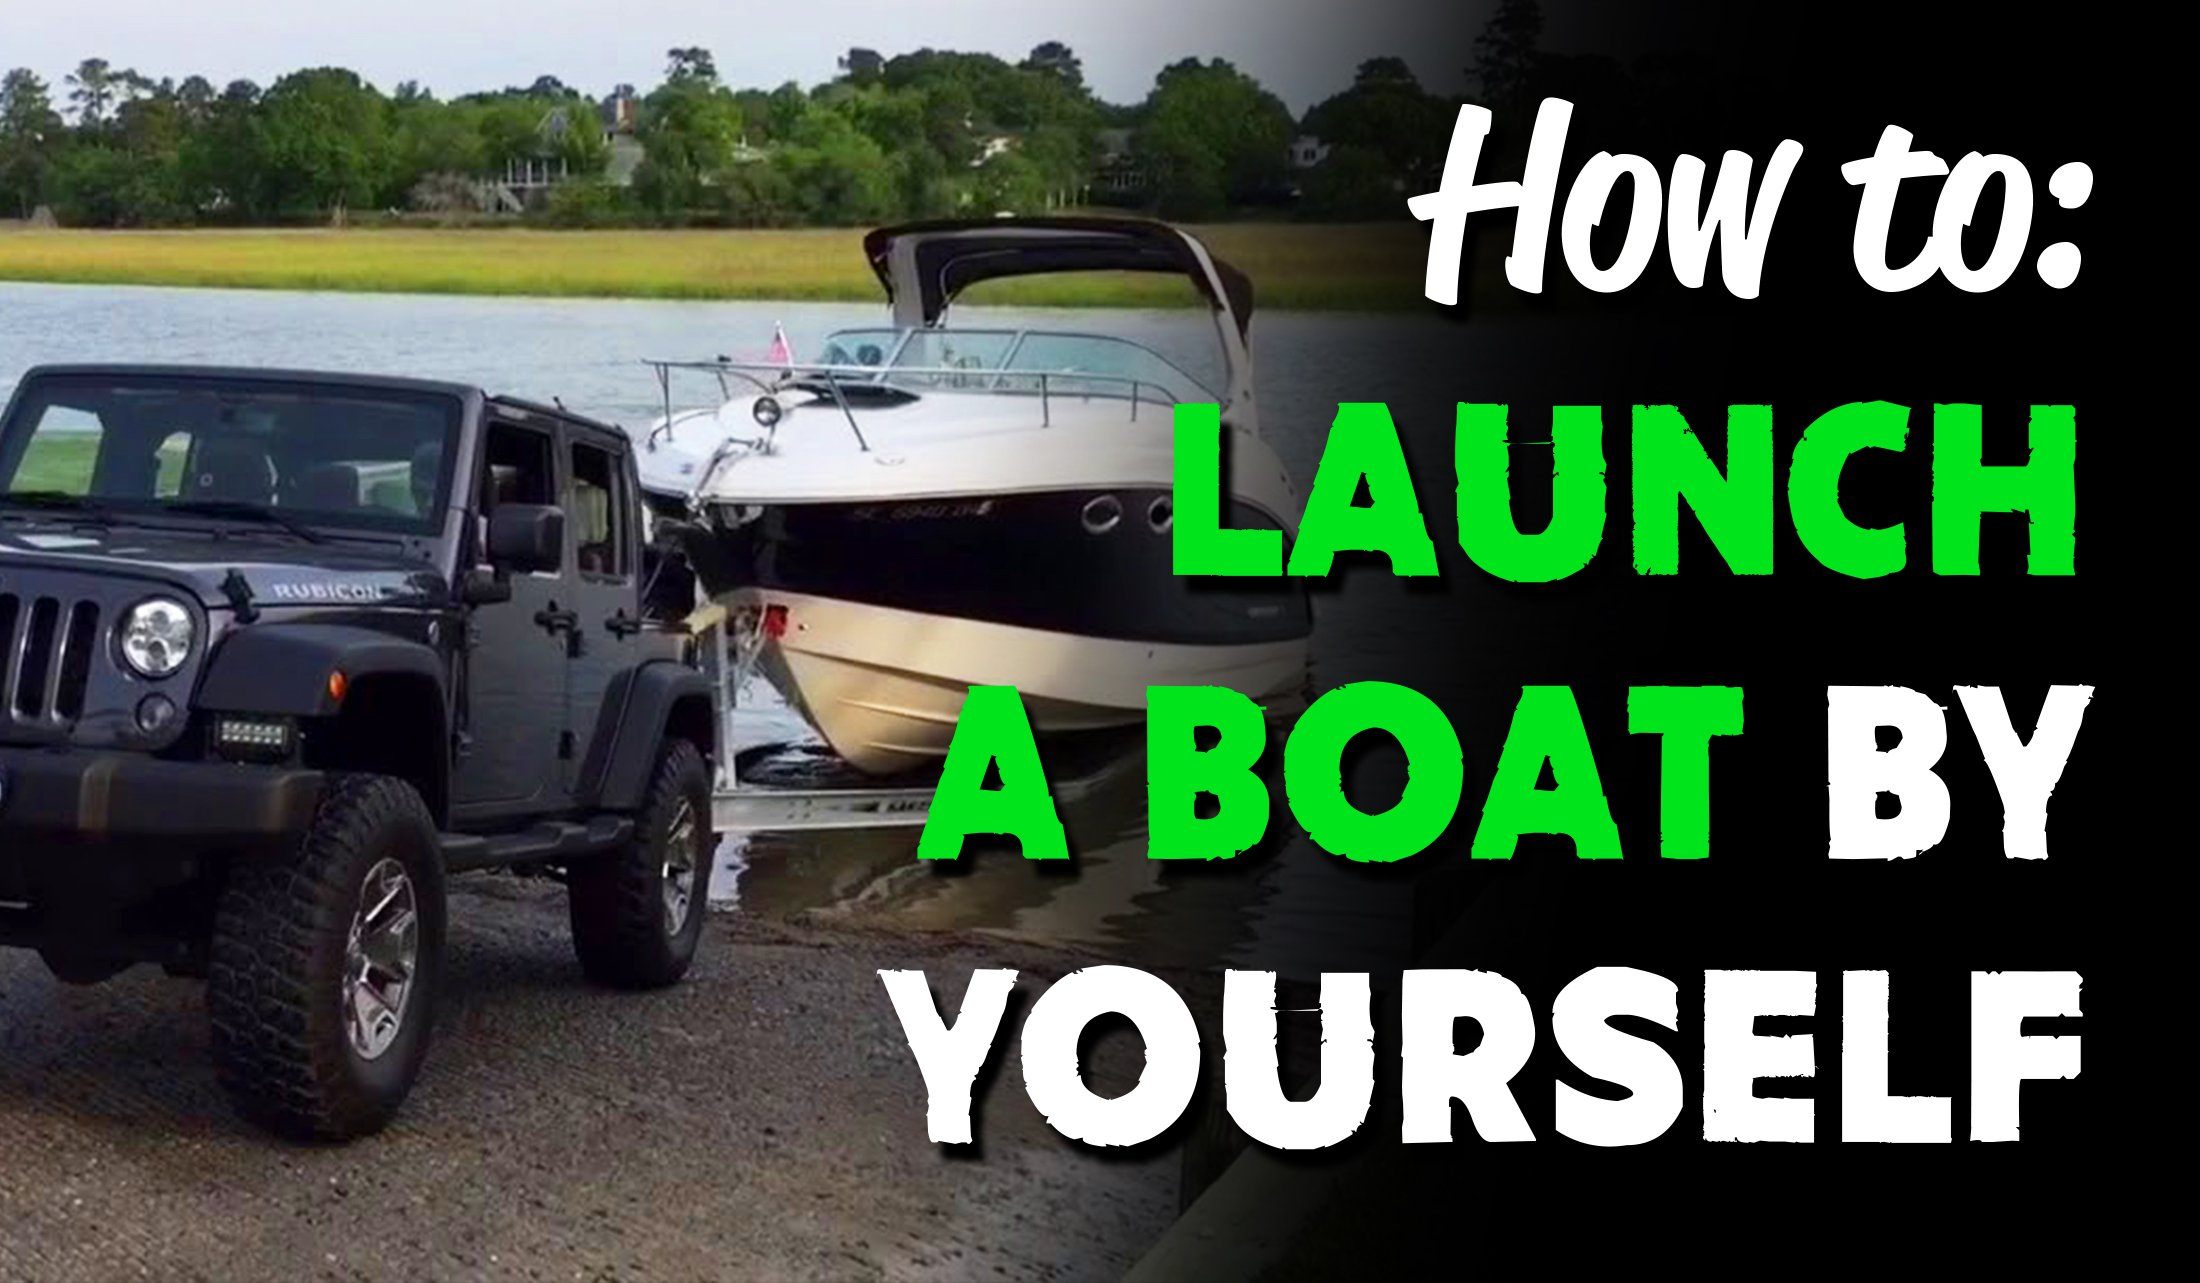 How to Quickly Launch a Boat by Yourself